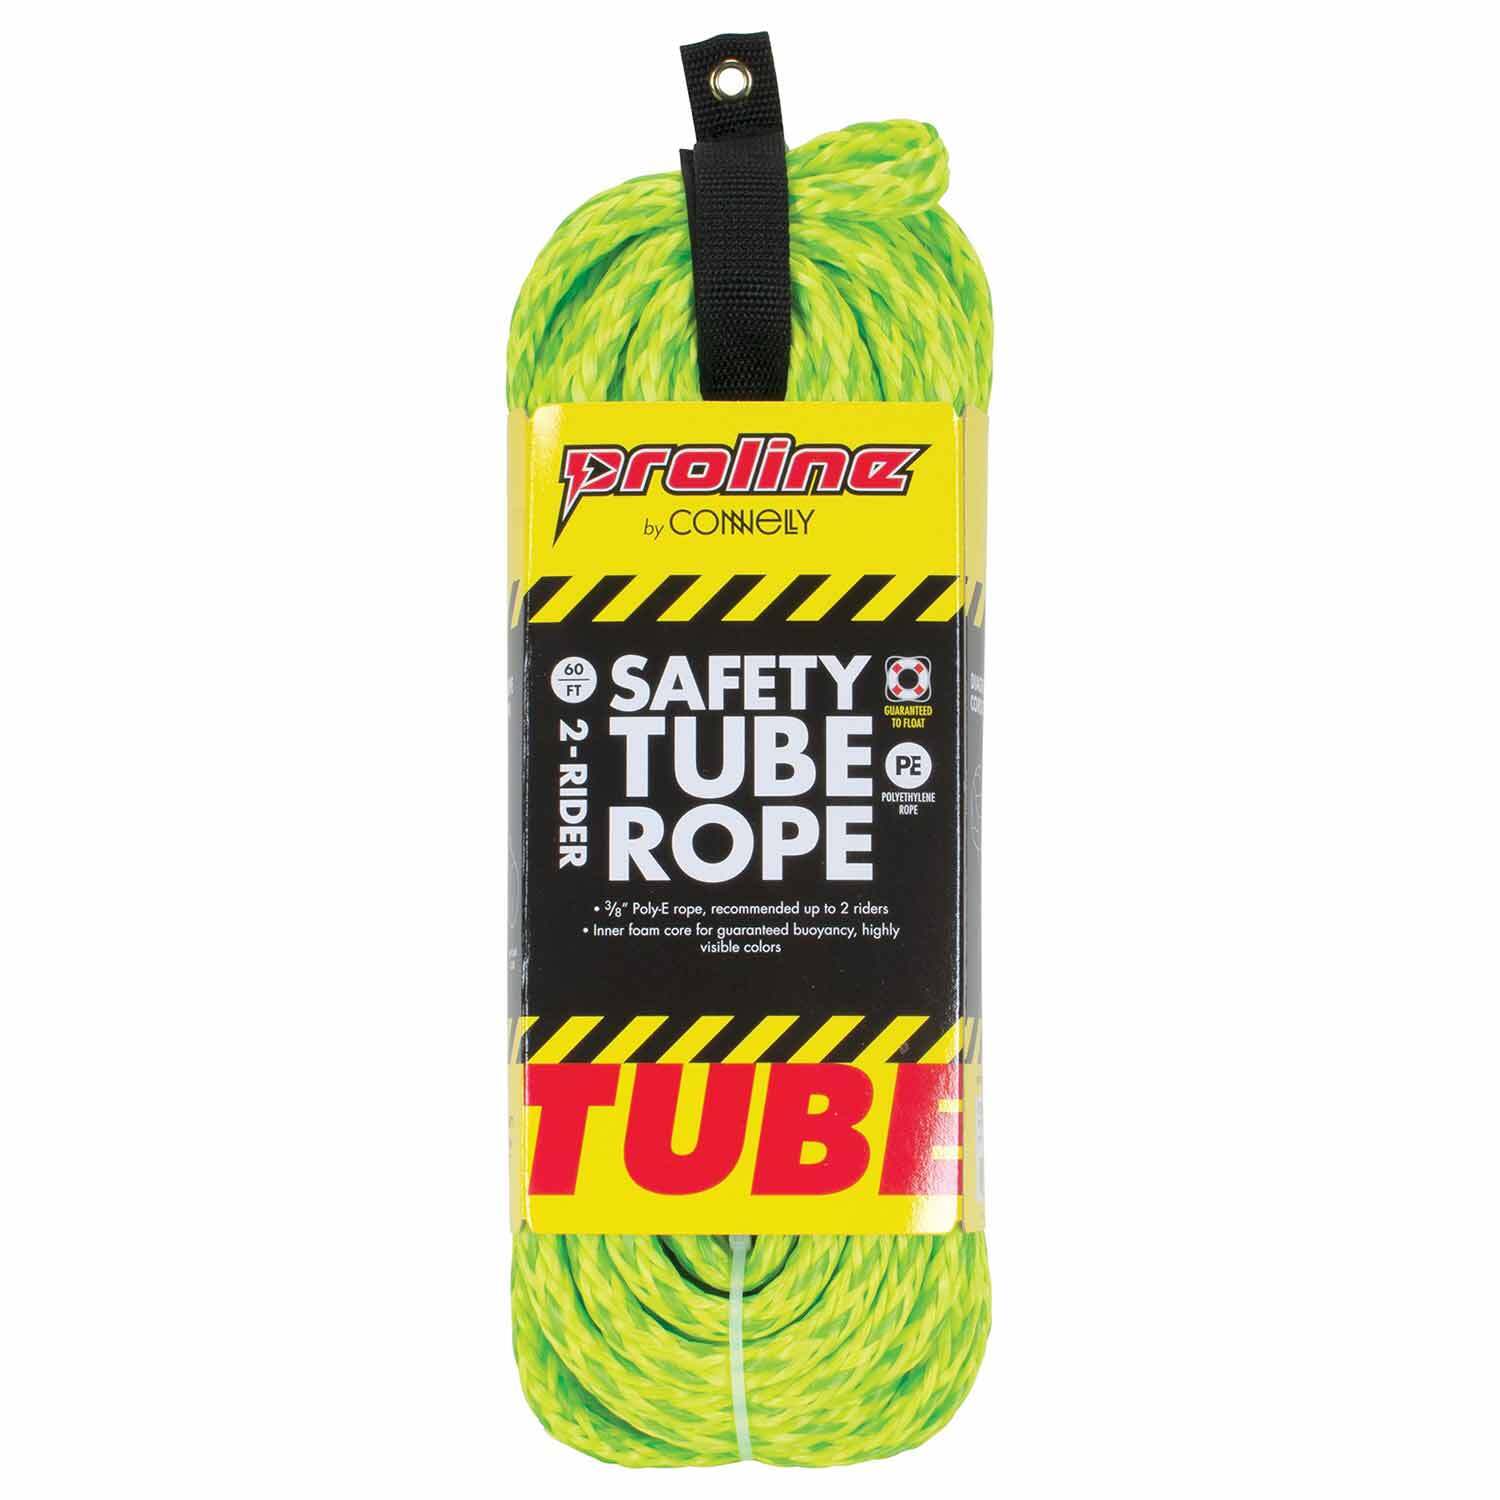 Connelly Safety Tube Rope 4 Rider Red/Yellow